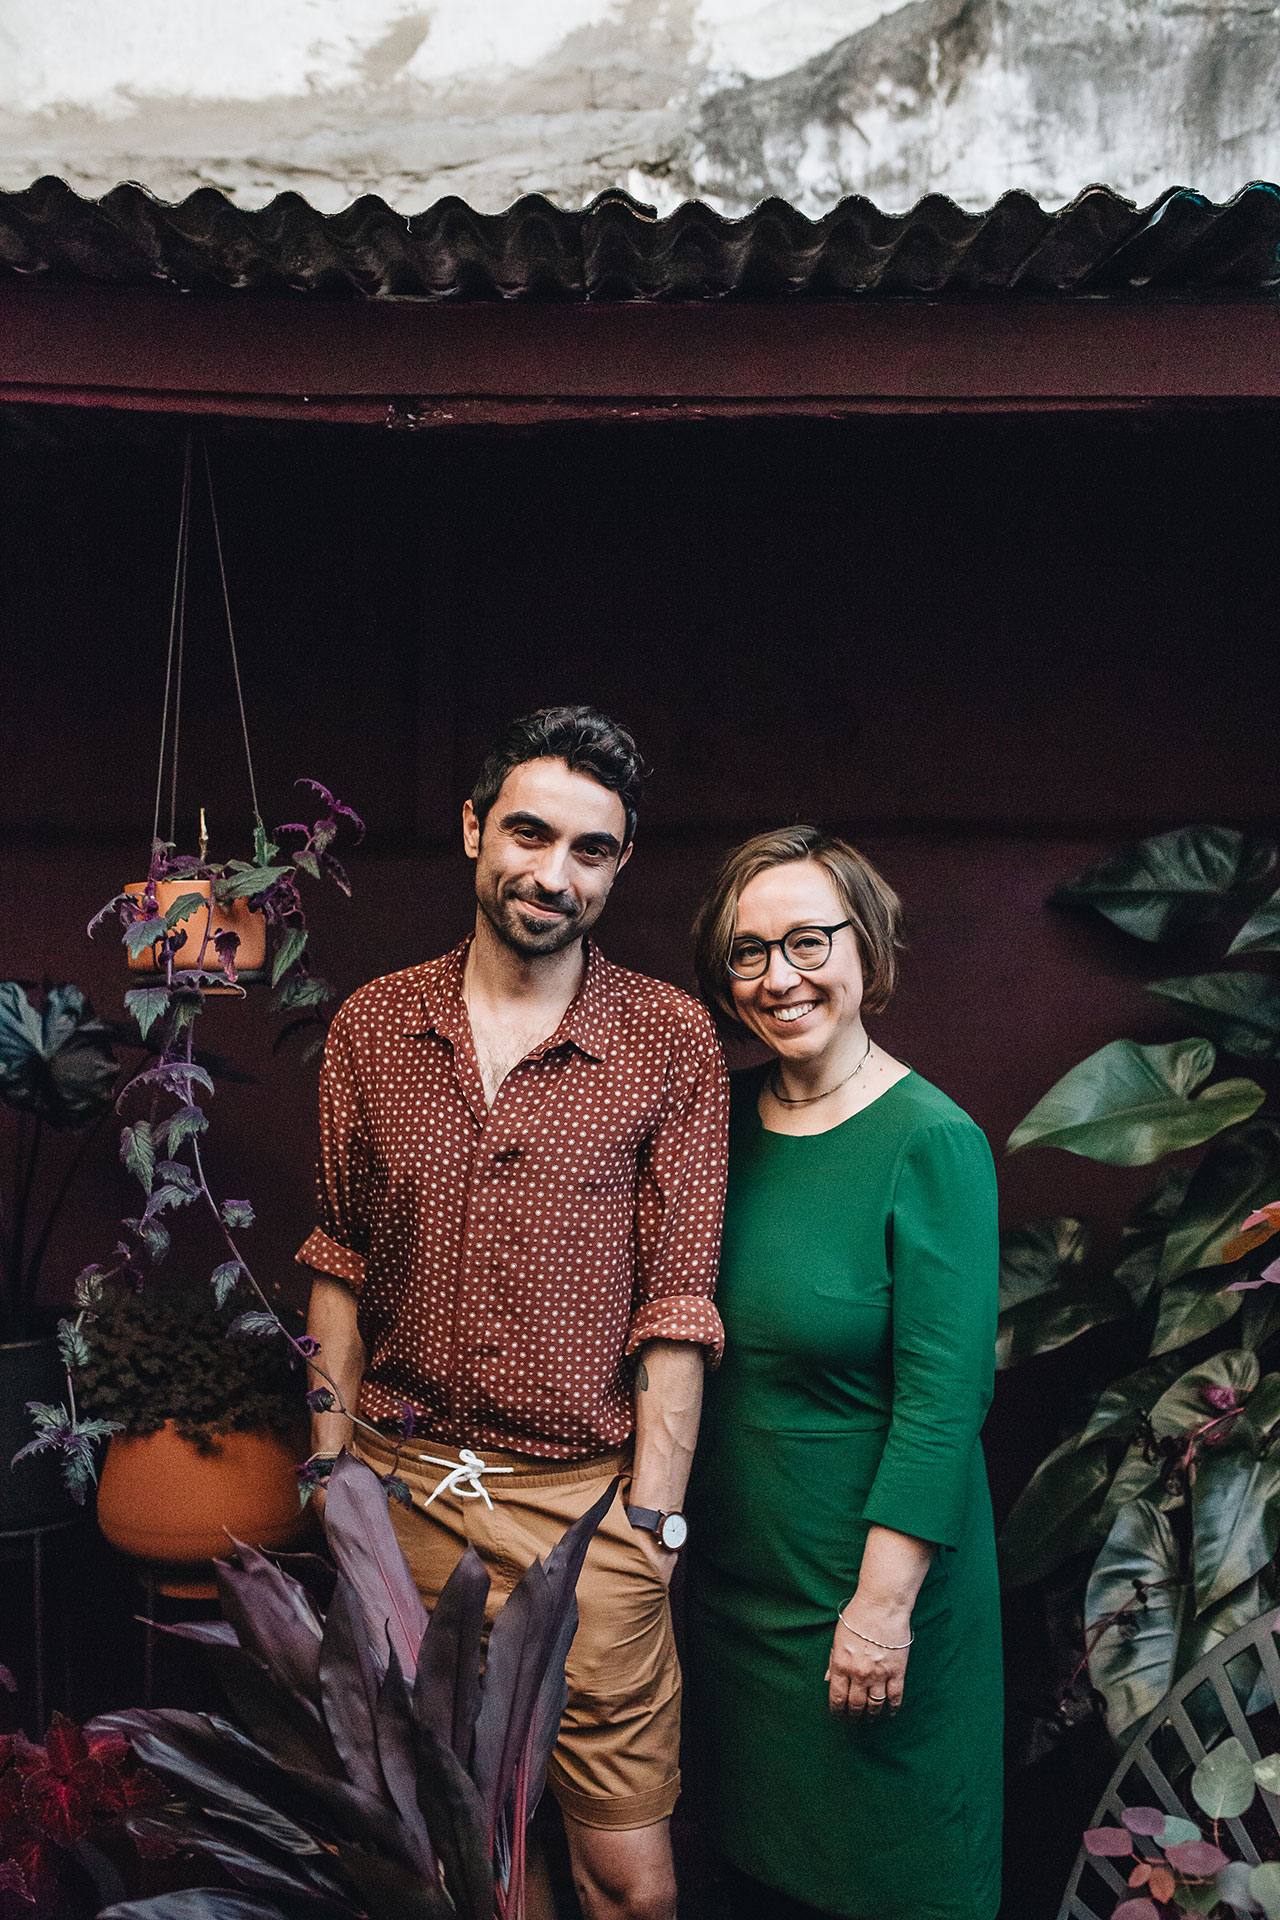 Igor Josifovic and Judith de Graaff, founders of Urban Jungle Bloggers and authors of URBAN JUNGLE and PLANT TRIBE.
Photography by Jules Villbrandt.